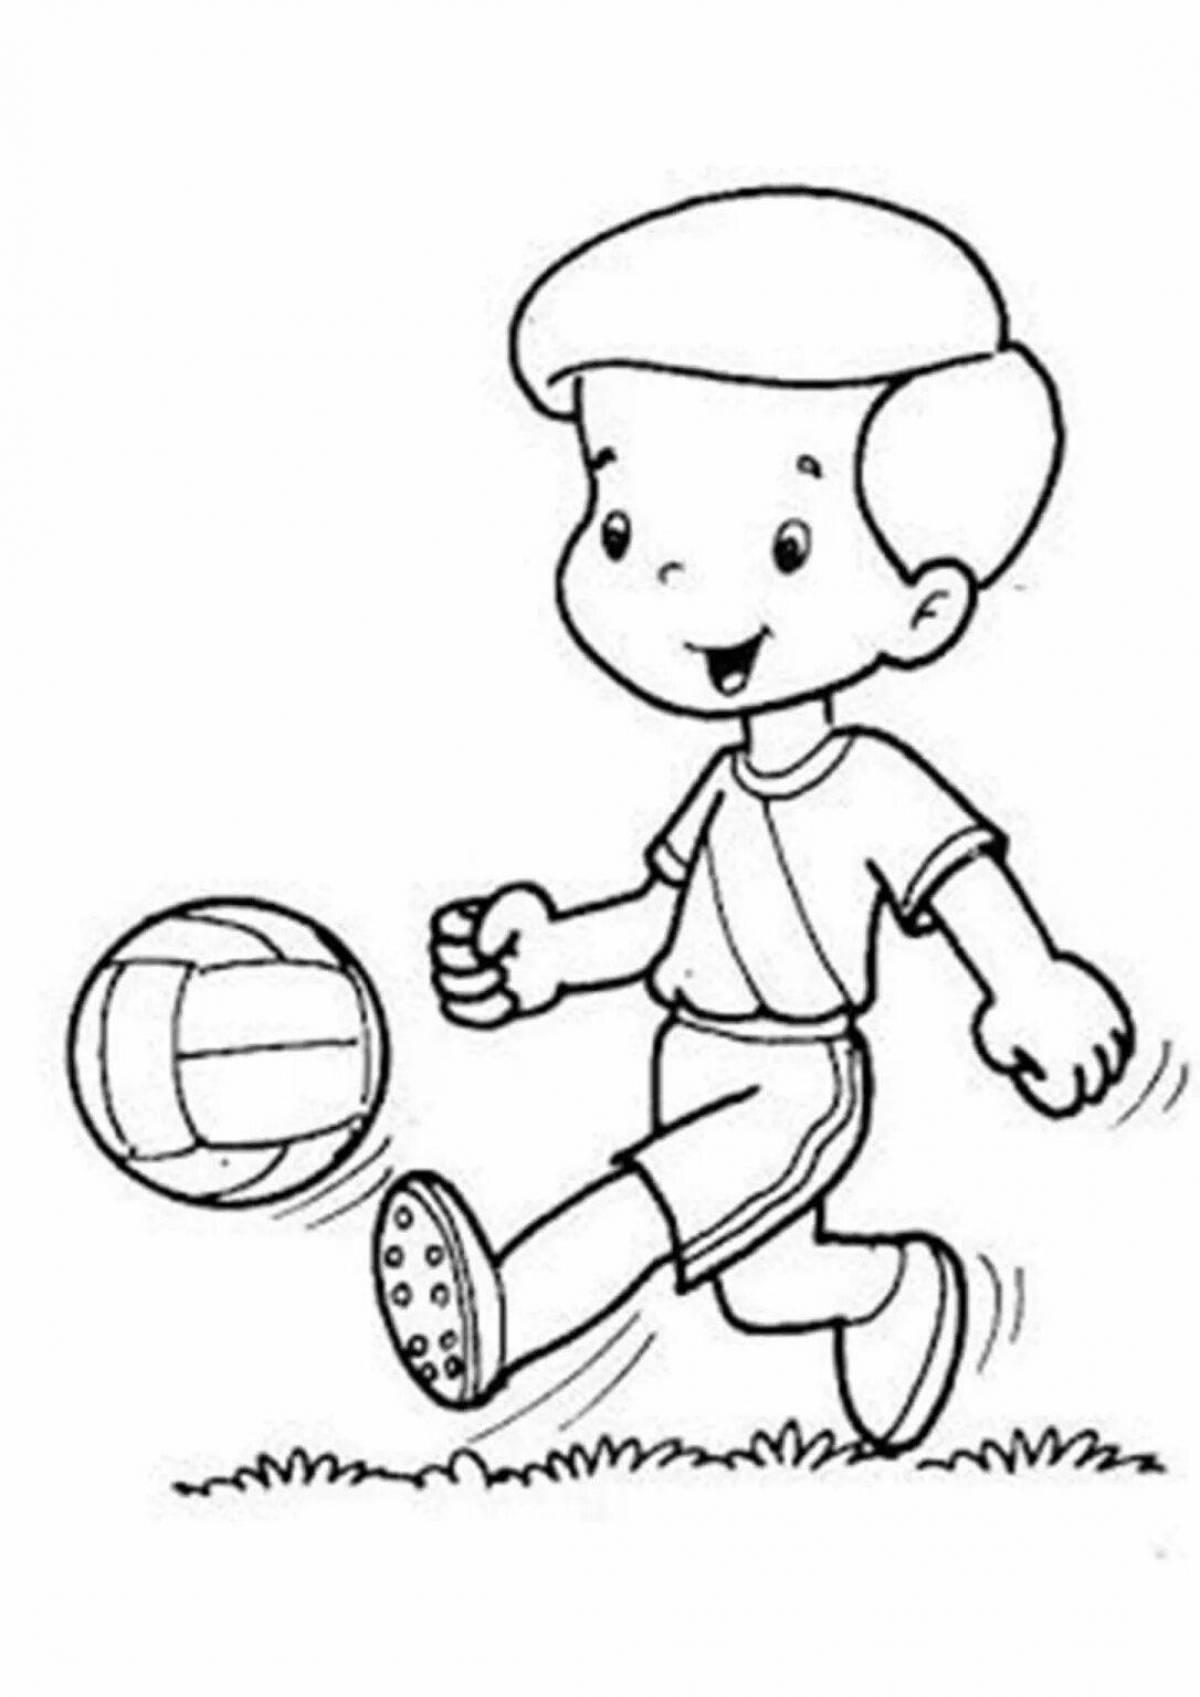 Amazing health and sports coloring book